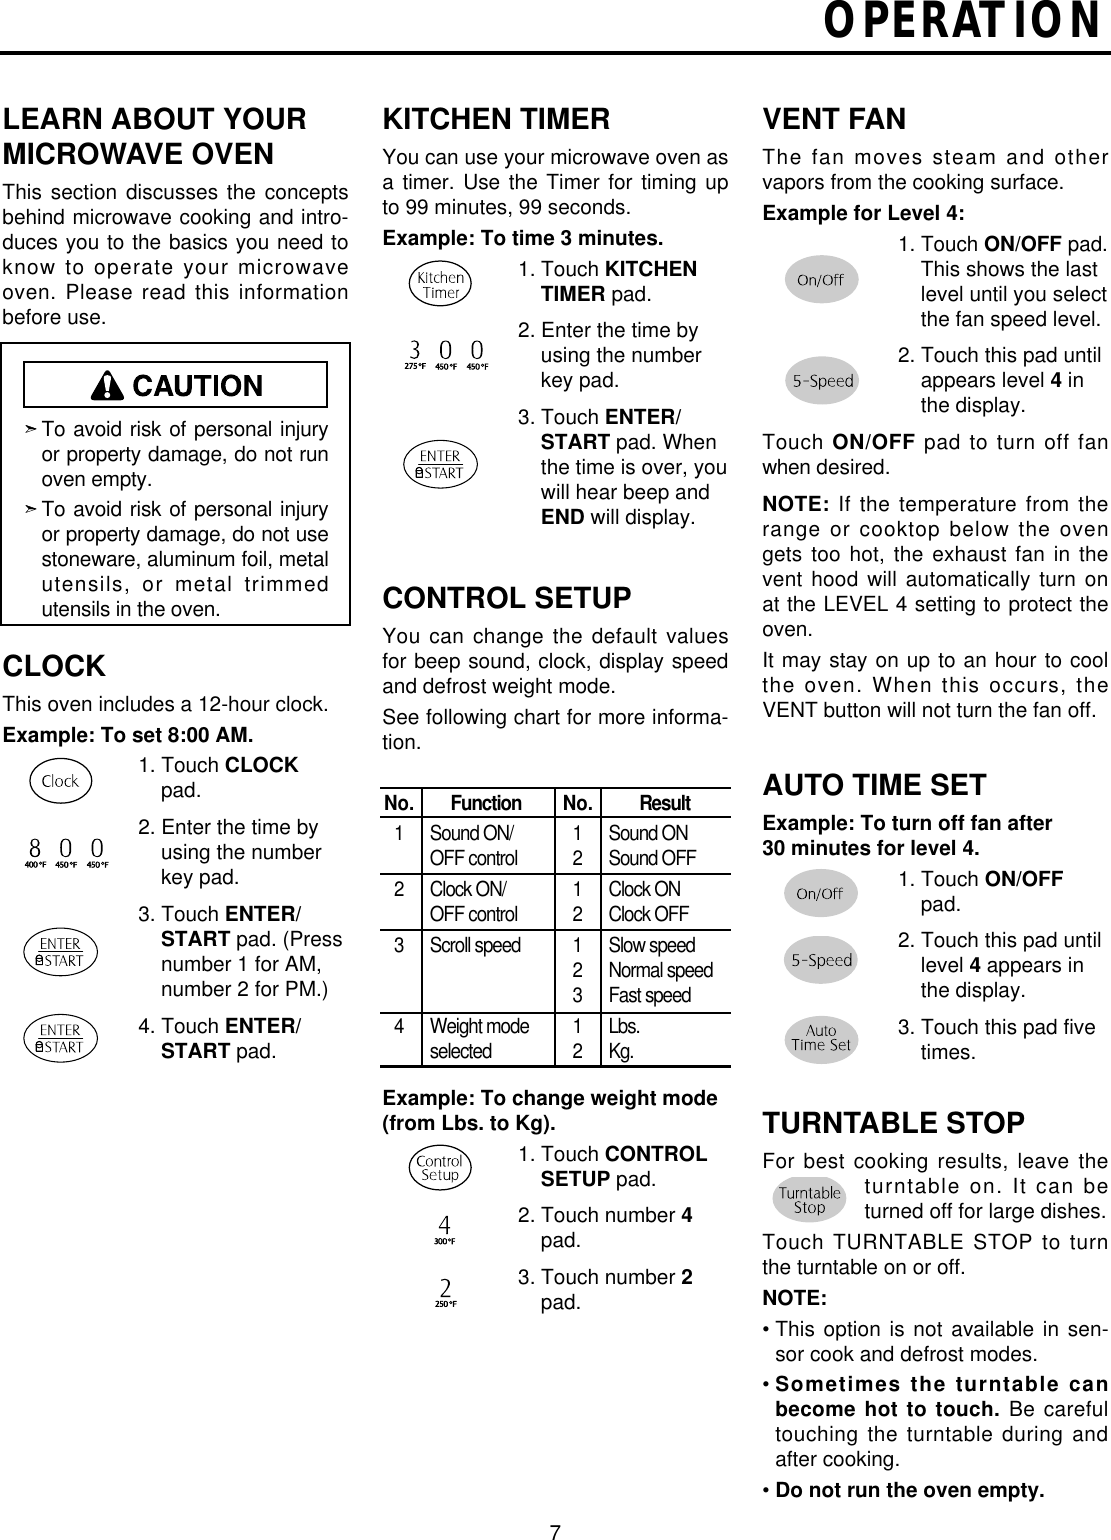 OPERATION7LEARN ABOUT YOURMICROWAVE OVENThis section discusses the  conceptsbehind microwave cooking and intro-duces you to the basics you need toknow to operate your microwaveoven. Please read this informationbefore use.CLOCKThis oven includes a 12-hour clock.Example: To set 8:00 AM.1. Touch CLOCKpad. 2. Enter the time byusing the numberkey pad.3. Touch ENTER/START pad. (Pressnumber 1 for AM,number 2 for PM.)4. Touch ENTER/START pad.KITCHEN TIMERYou can use your microwave oven asa timer.  Use the  Timer for timing upto 99 minutes, 99 seconds.Example: To time 3 minutes.1. Touch KITCHENTIMER pad.2. Enter the time byusing the numberkey pad.3. Touch ENTER/START pad. Whenthe time is over, youwill hear beep andEND will display.CONTROL SETUPYou can change the default valuesfor beep sound, clock, display speedand defrost weight mode.See following chart for more informa-tion.Example: To change weight mode(from Lbs. to Kg).1. Touch CONTROLSETUP pad. 2. Touch number 4pad.3. Touch number 2pad.VENT FANThe fan moves steam and othervapors from the cooking surface.Example for Level 4:1. Touch ON/OFF pad.This shows the lastlevel until you selectthe fan speed level.2. Touch this pad untilappears level 4inthe display.Touch ON/OFF pad to turn off fanwhen desired.NOTE: If the temperature from therange or cooktop below the ovengets too hot, the exhaust fan in thevent hood will automatically turn onat the LEVEL 4 setting to protect theoven.It may stay on up to an hour to coolthe oven. When this occurs, theVENT button will not turn the fan off.AUTO TIME SETExample: To turn off fan after30 minutes for level 4.1. Touch ON/OFFpad. 2. Touch this pad untillevel 4appears inthe display.3. Touch this pad fivetimes.TURNTABLE STOPFor best cooking results, leave theturntable on. It can beturned off for large dishes.Touch TURNTABLE STOP to turnthe turntable on or off.NOTE:• This option is not available in sen-sor cook and defrost modes.• Sometimes the turntable canbecome hot to touch. Be carefultouching the turntable during andafter cooking.• Do not run the oven empty.To avoid risk of personal injuryor property damage, do not runoven empty.To avoid risk of personal injuryor property damage, do not usestoneware, aluminum foil, metalutensils,  or  metal  trimmedutensils in the oven.No.1234FunctionSound ON/OFF controlClock ON/OFF controlScroll speedWeight modeselectedNo.121212312ResultSound ONSound OFFClock ONClock OFFSlow speedNormal speedFast speedLbs.Kg.